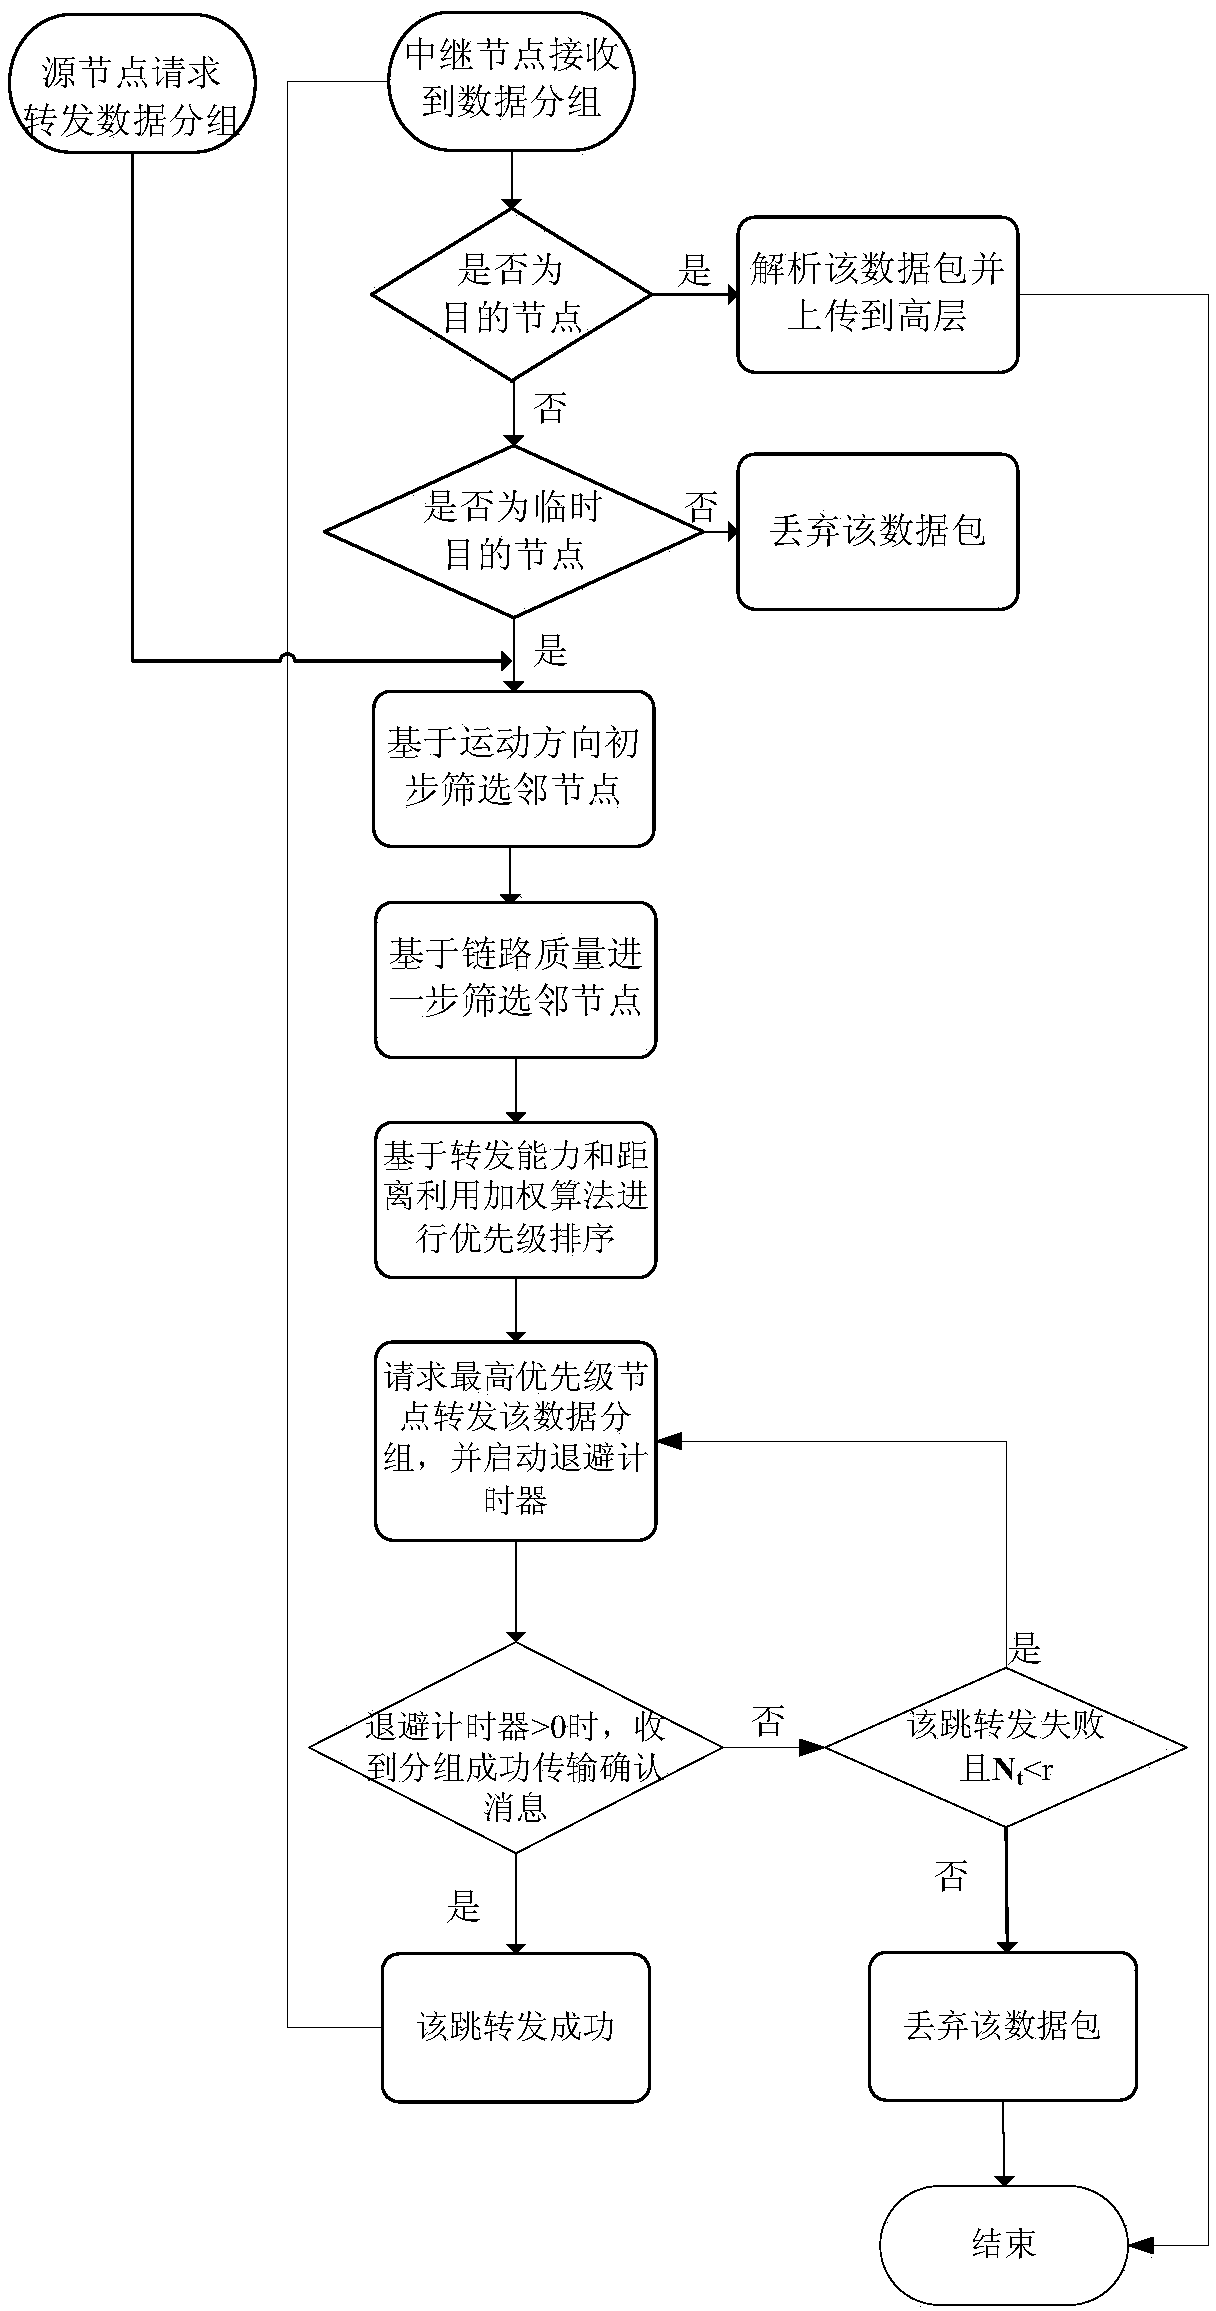 Routing Protocol Design Method Based on Link Quality and Node Forwarding Capability